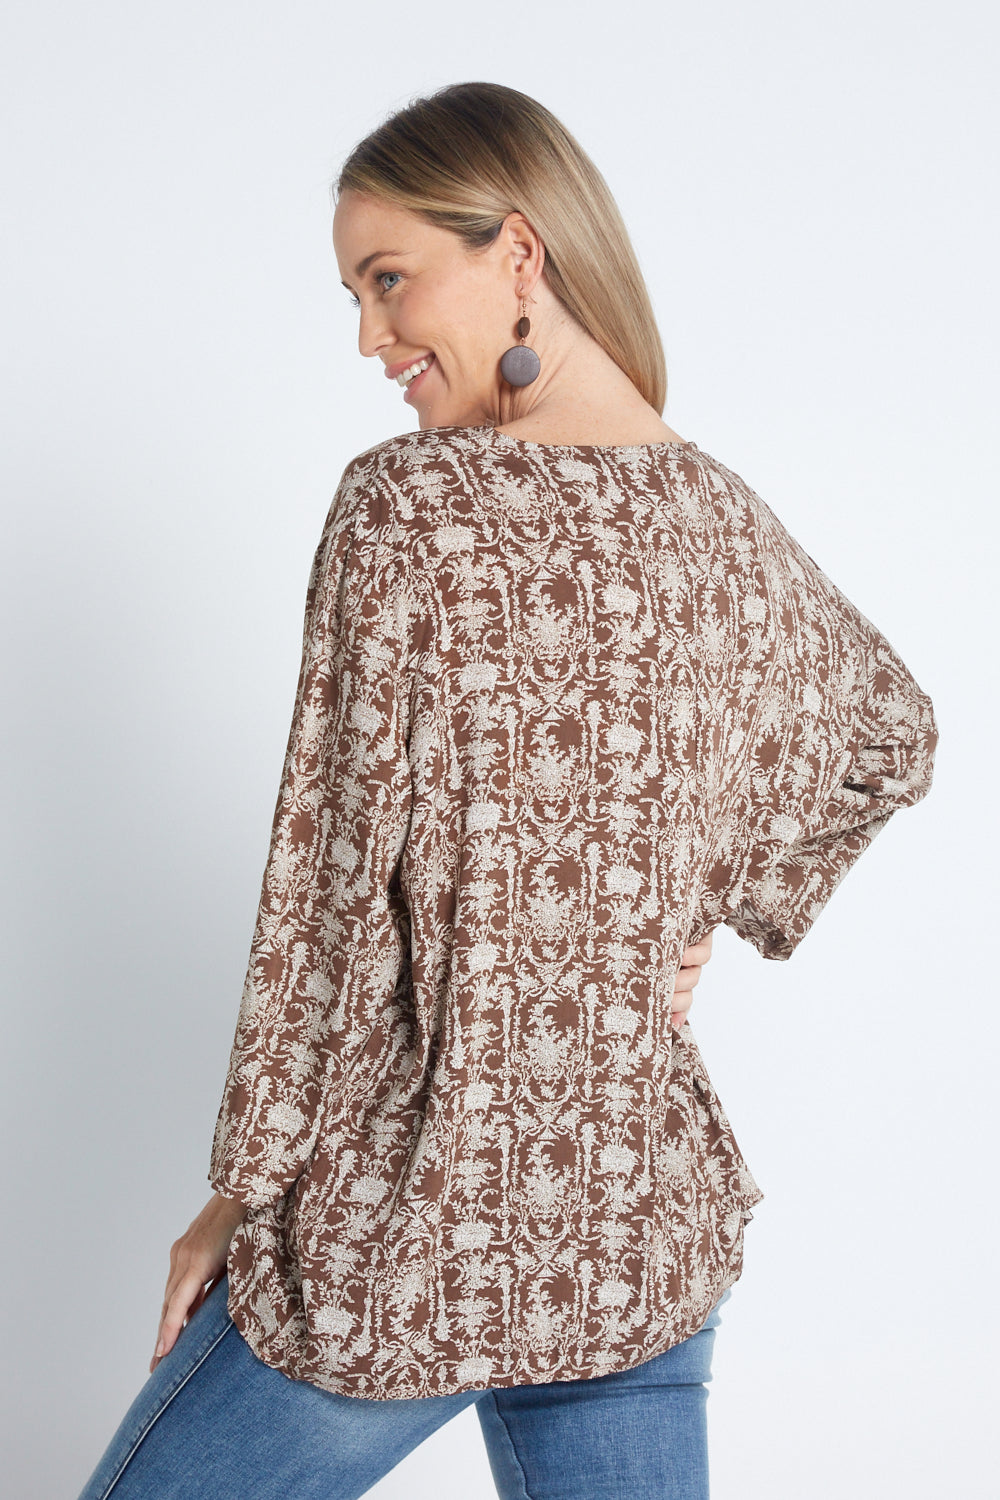 Leabrook Top - Mocha Tapestry